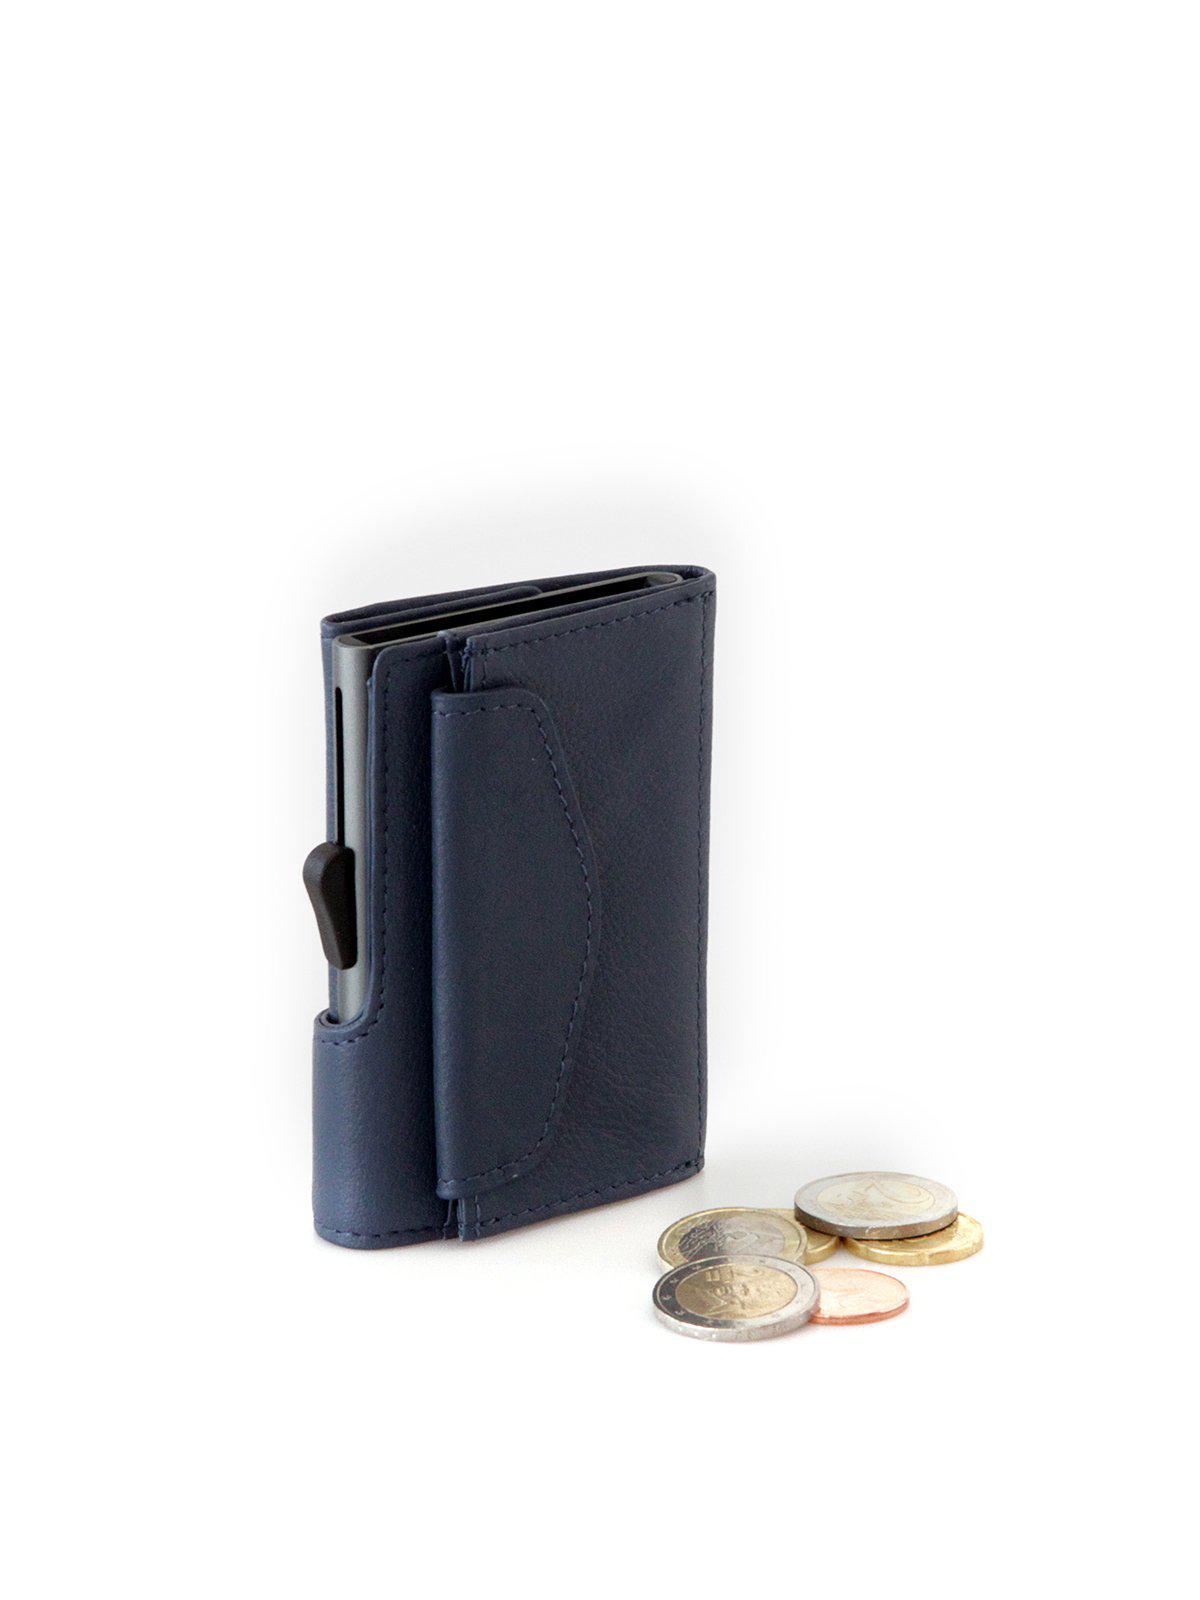 C-Secure Italian Leather RFID Wallet With Coin Pouch Blue - MORE by Morello Indonesia